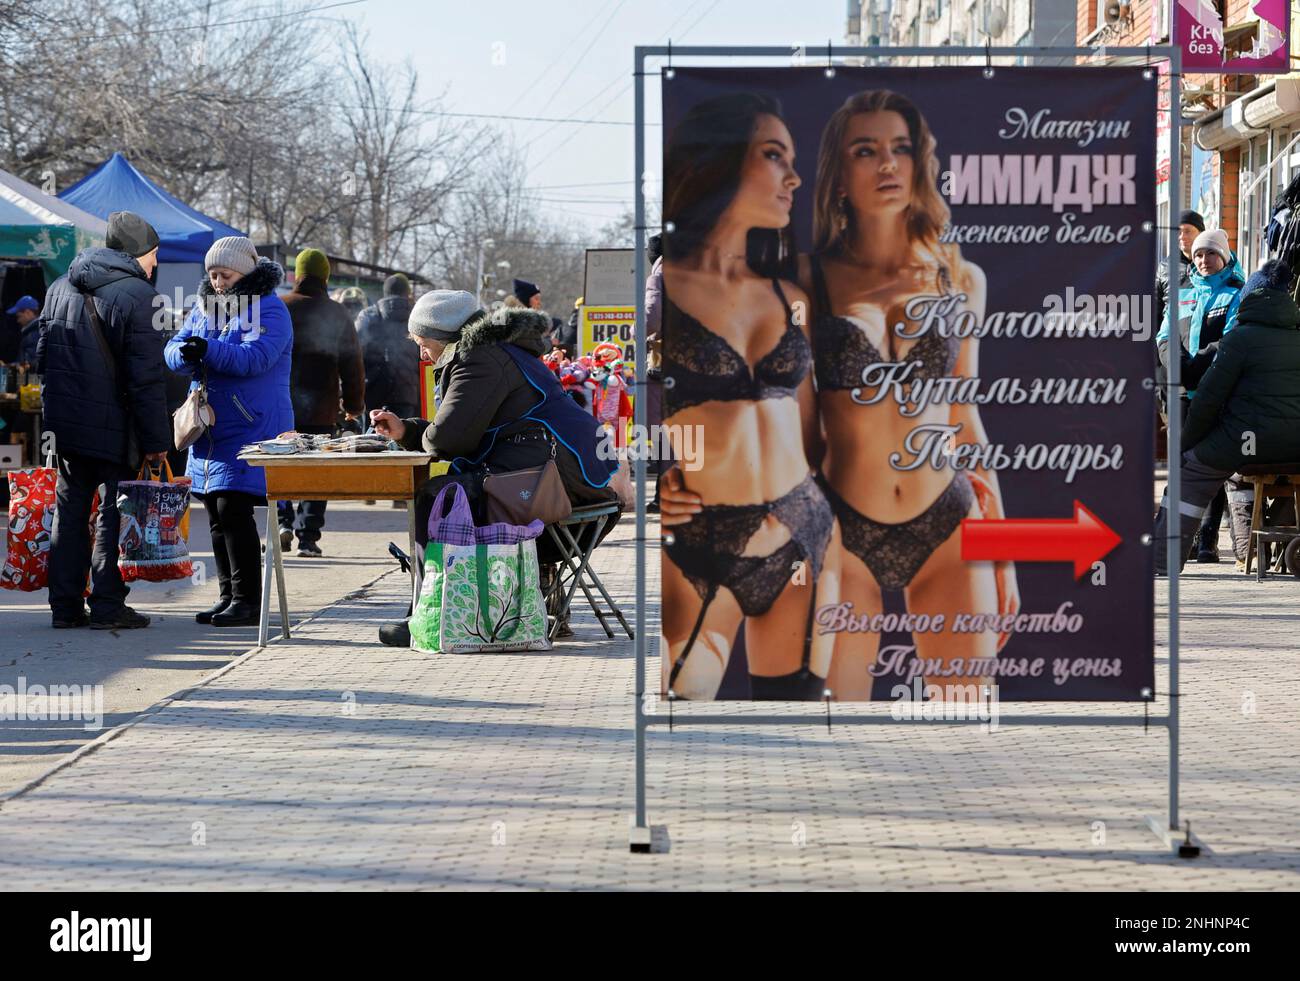 A view shows an advertising banner at a local market in the course of Russia-Ukraine conflict in Mariupol, Russian-controlled Ukraine, February 11, 2023. REUTERS/Alexander Ermochenko Stock Photo